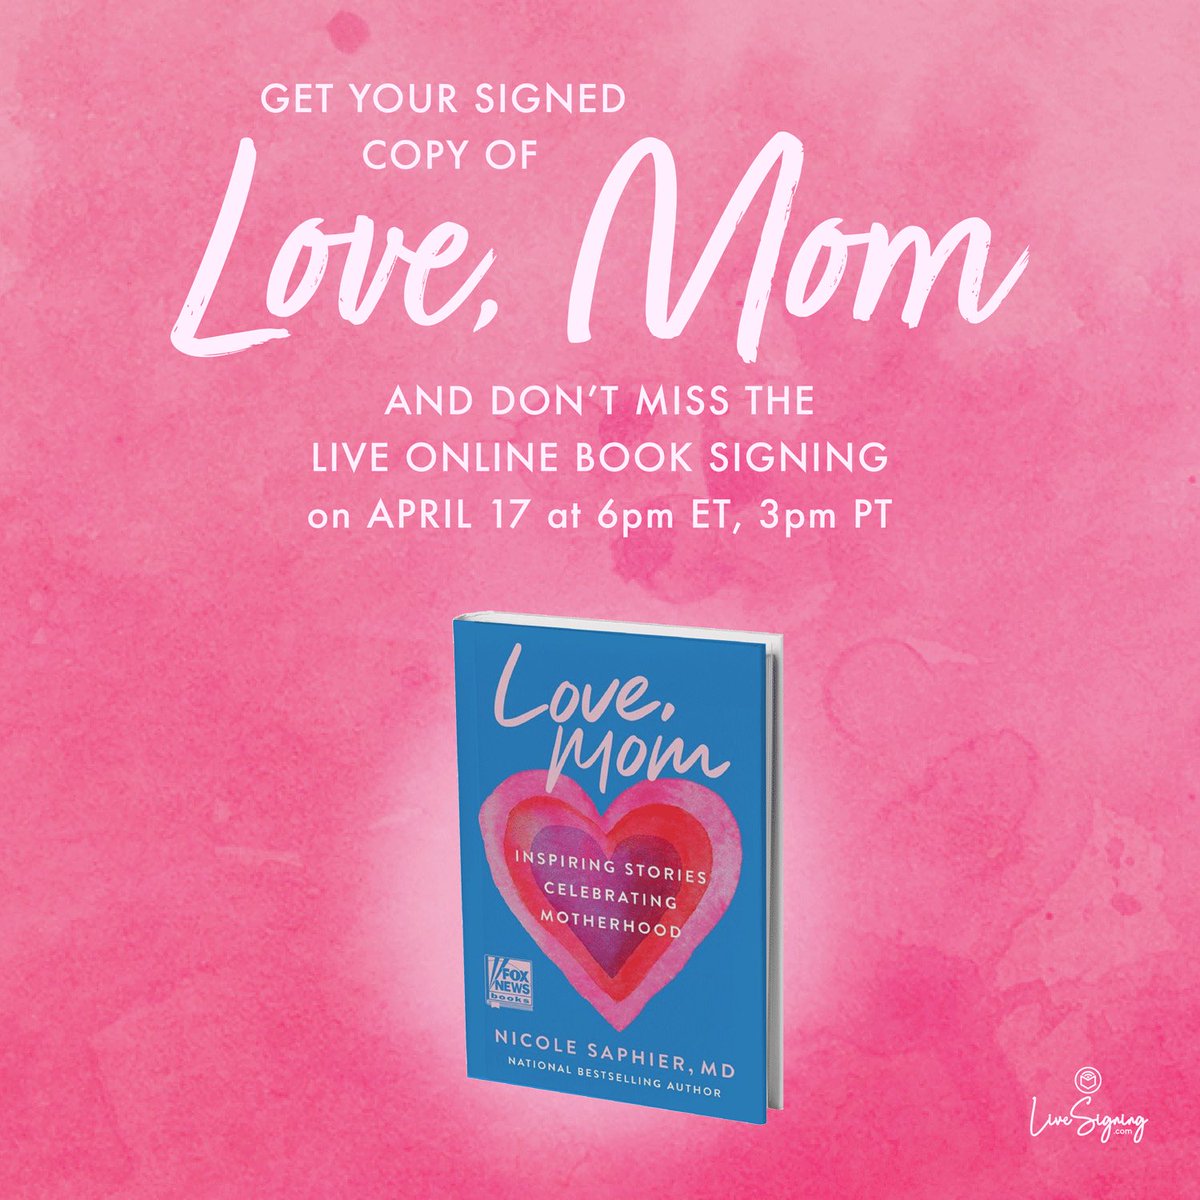 There’s still time to join me for a Premiere Collectibles Live Signing moderated by @rcamposduffy next Wednesday at 6pm et!  Pre-order your autographed copy of Love, Mom 💗 at signedlovemom.com